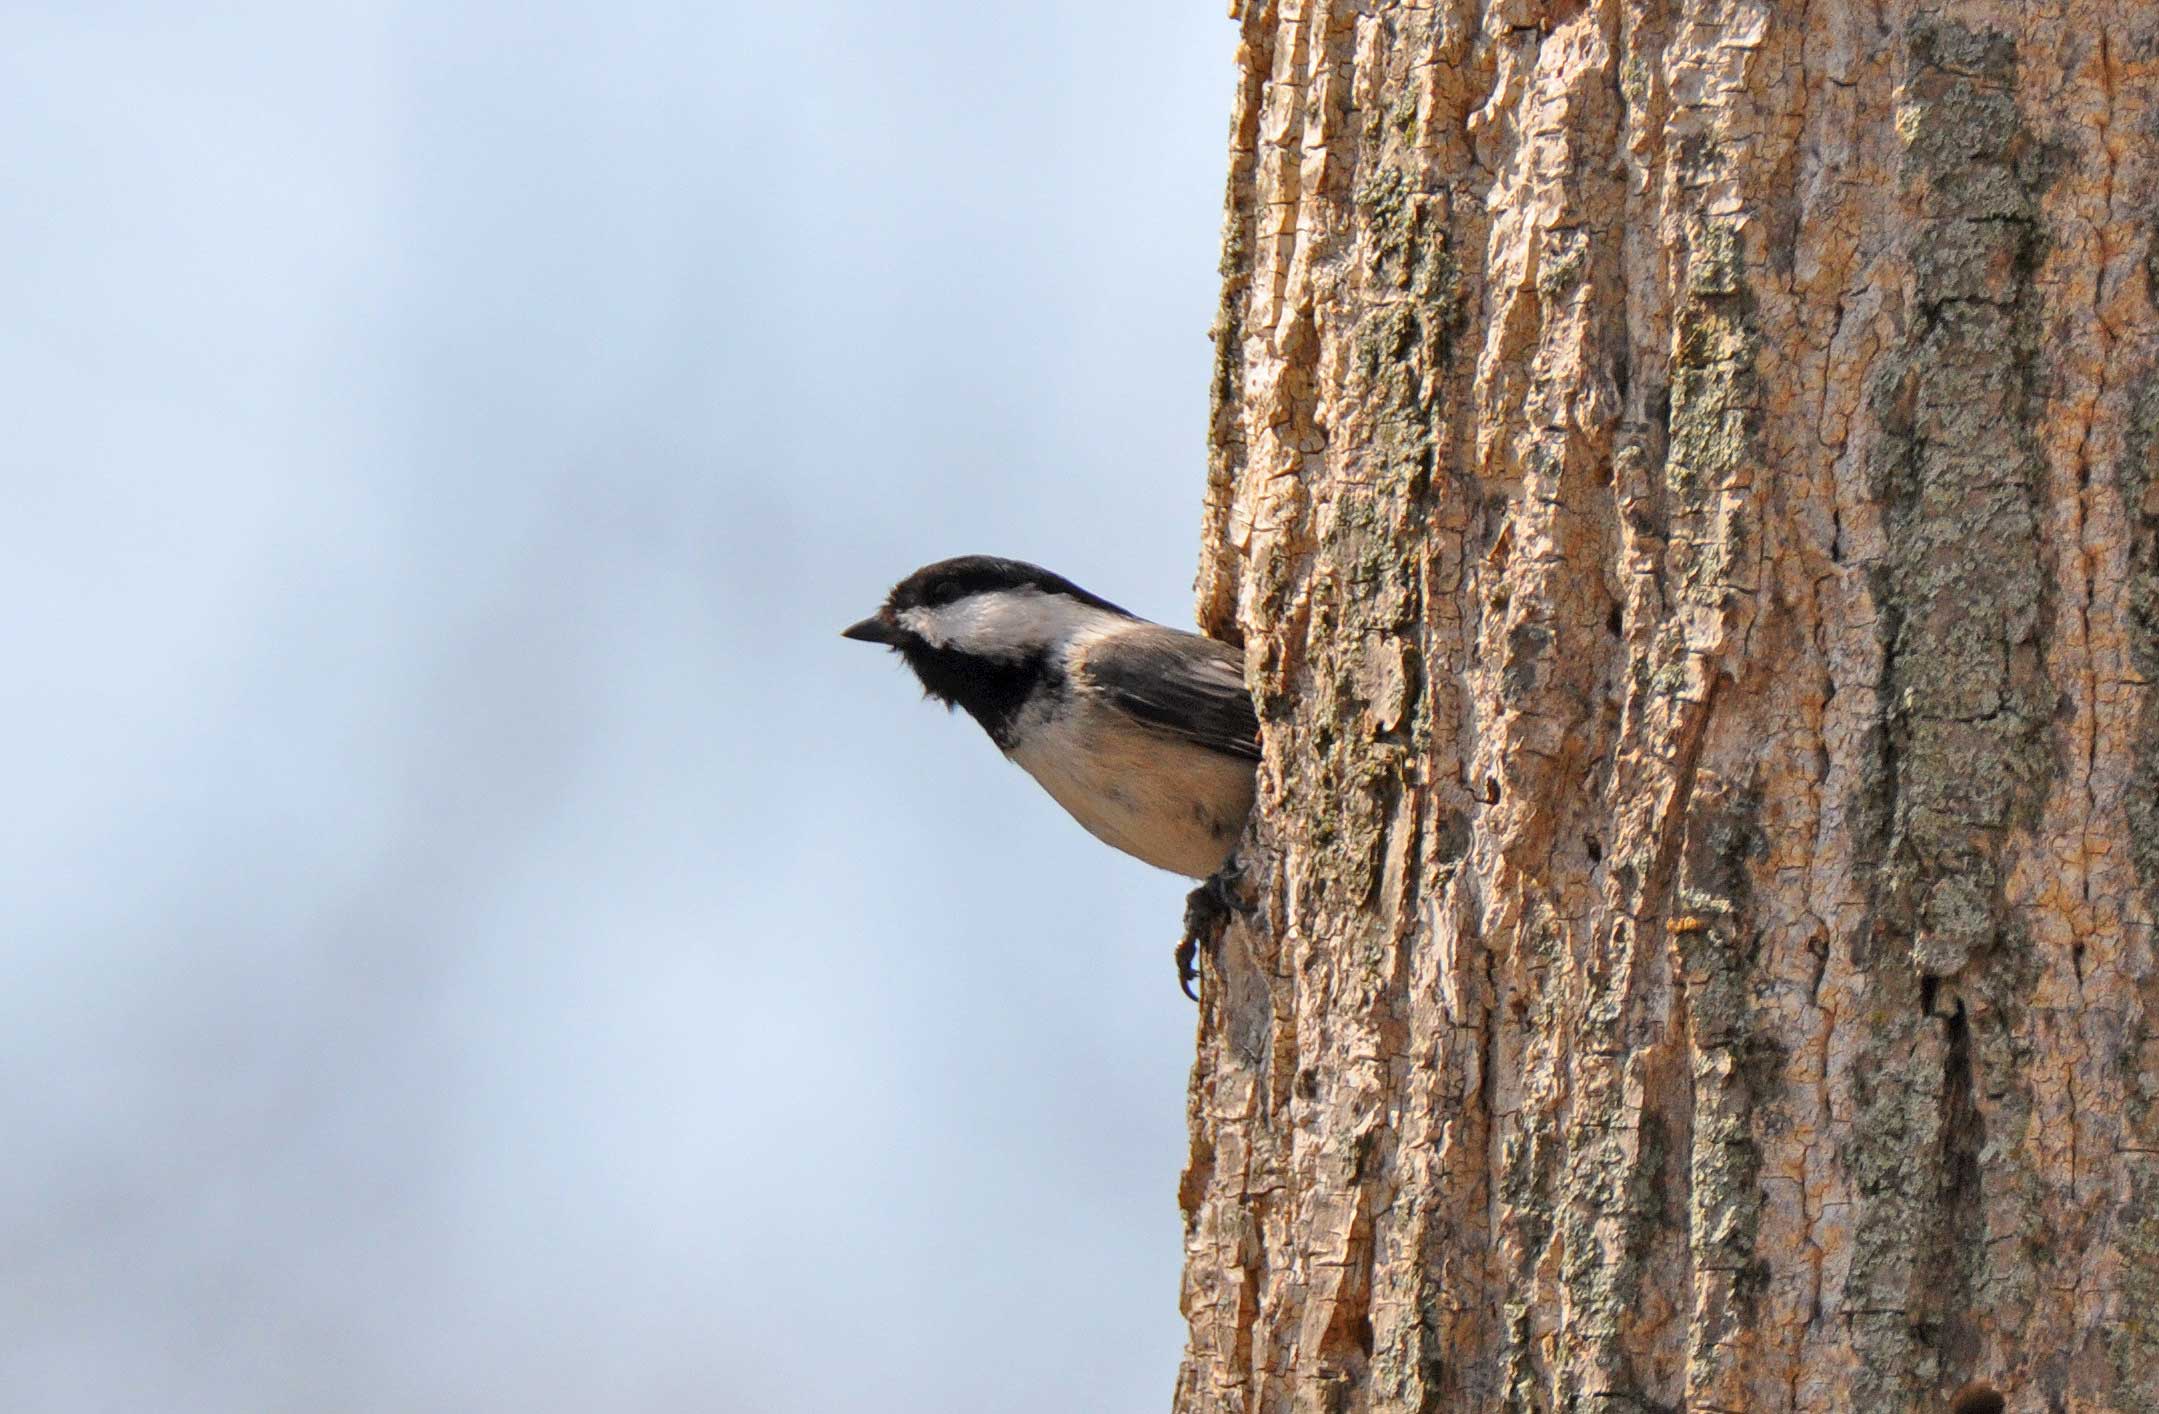 A black-capped chickadee on a tree branch.